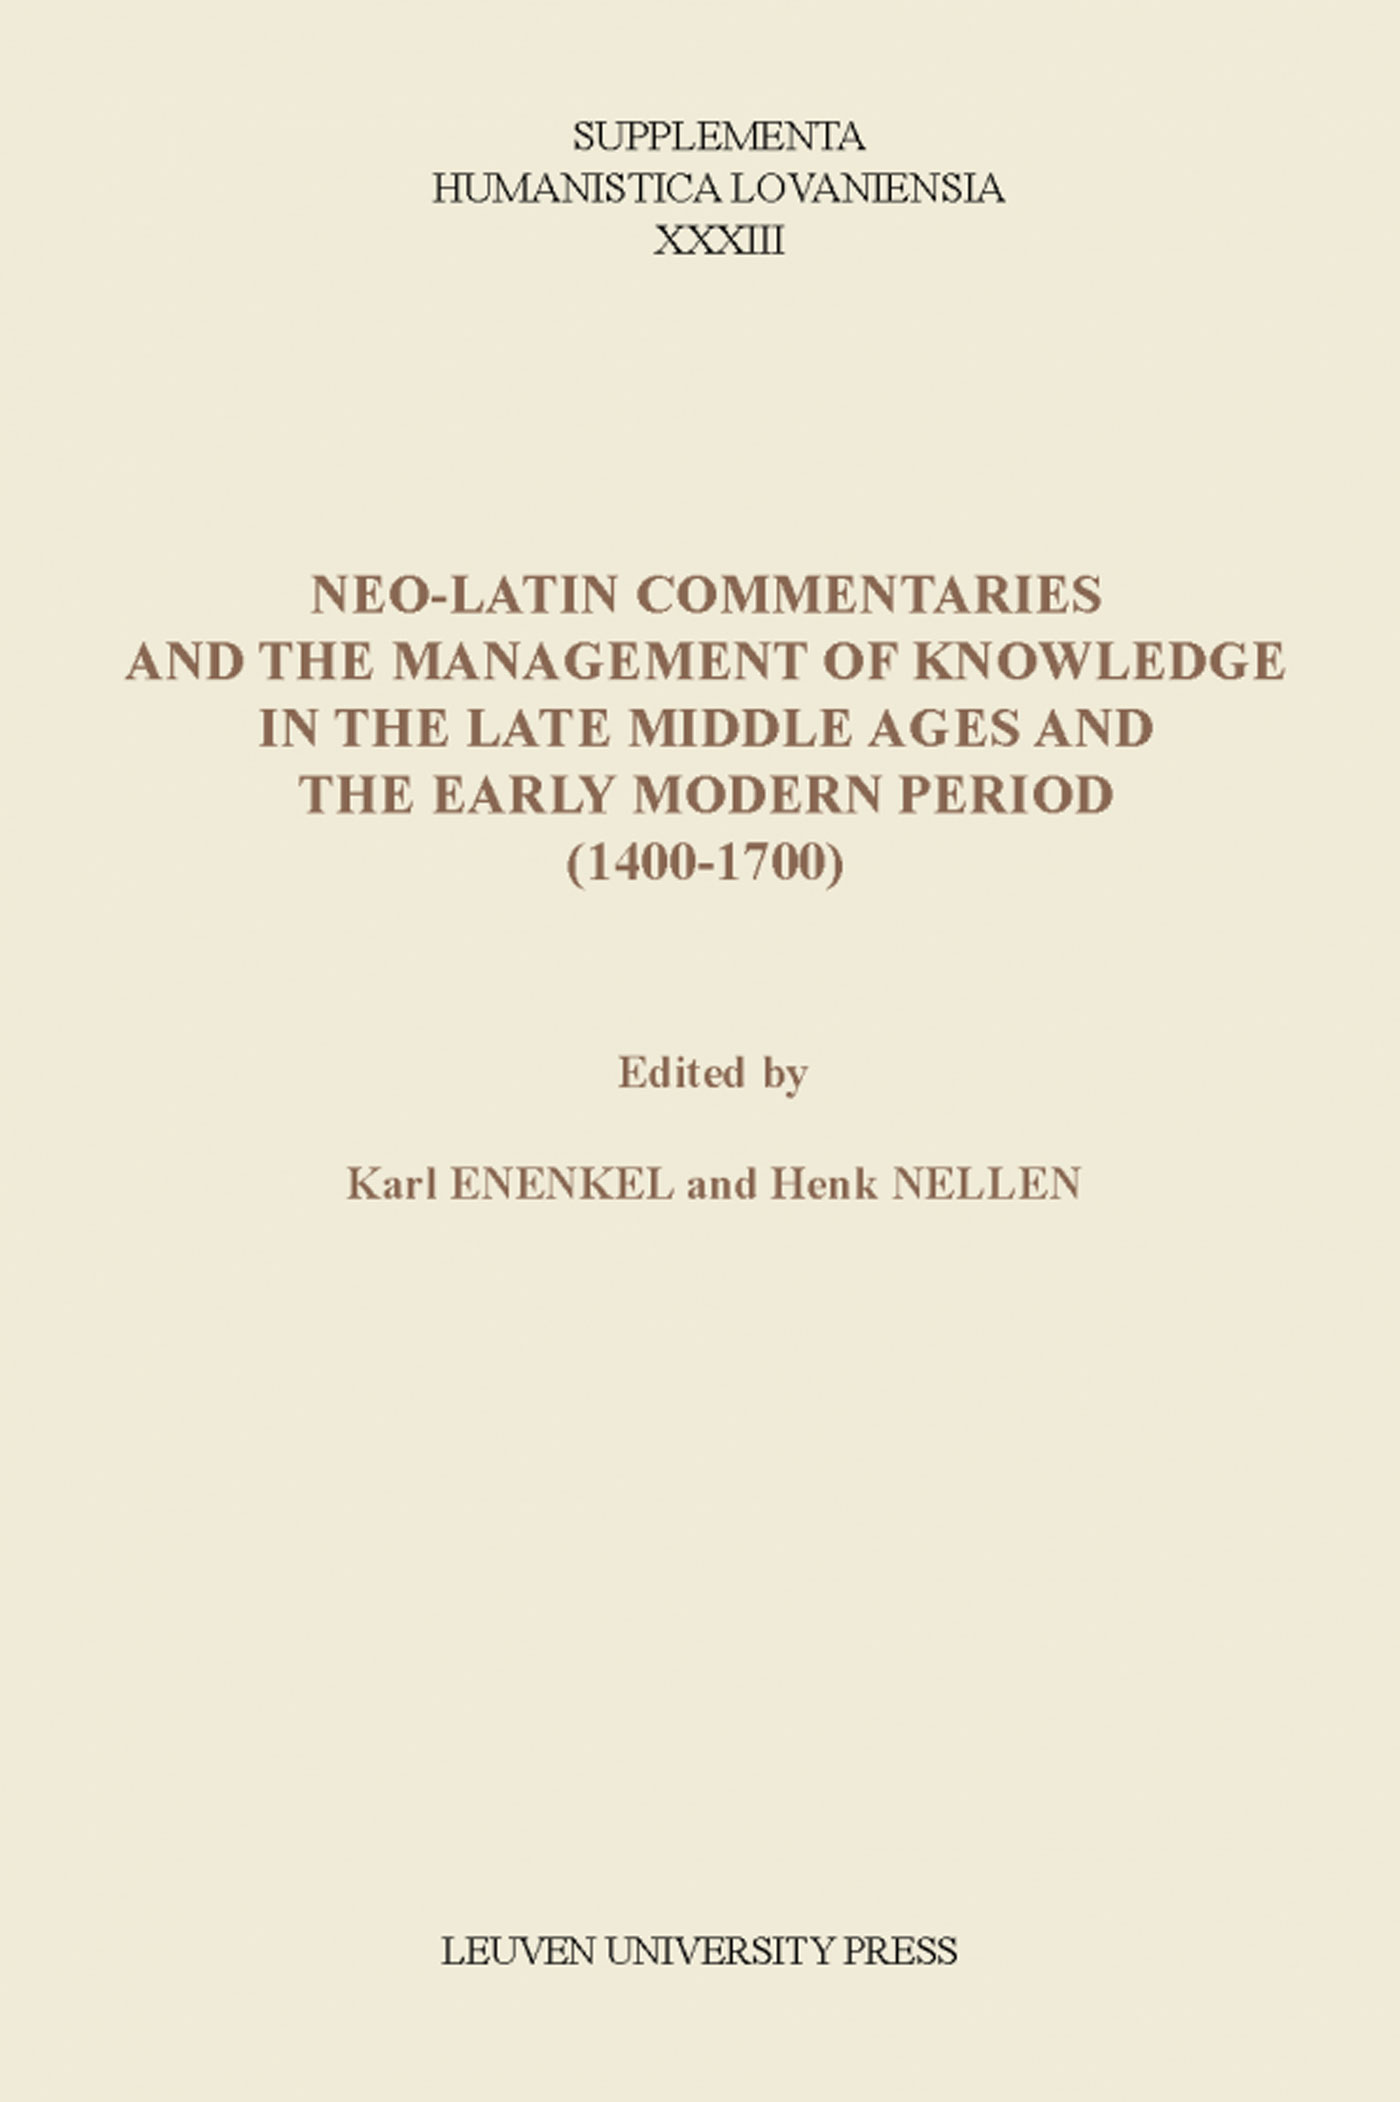 Neo-Latin commentaries and the management of knowledge in the late middle ages and the Early modern (Ebook)